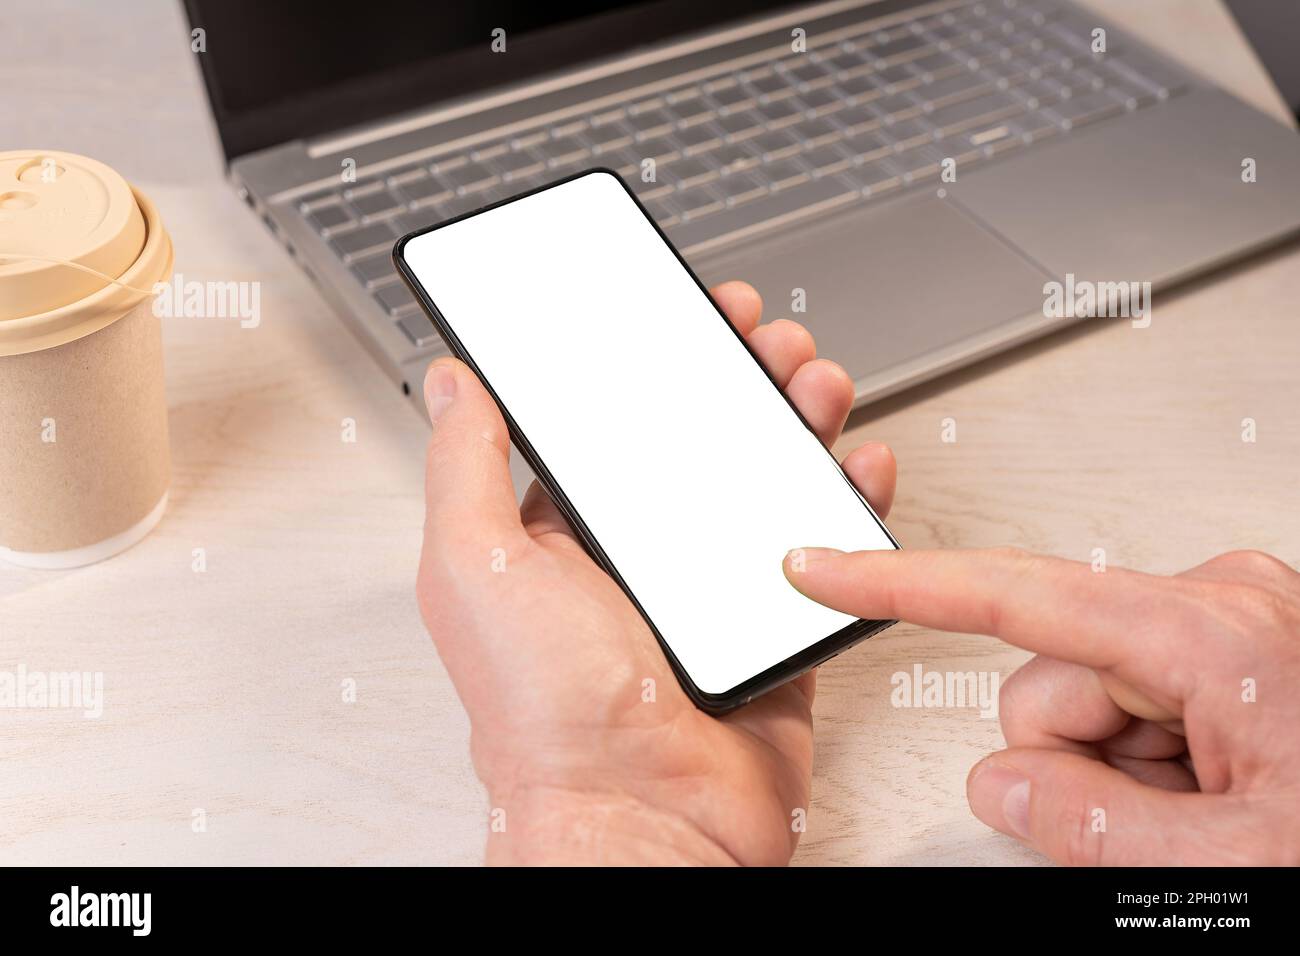 Hand holding mobile phone mockup, finger clicking, touching smartphone screen at wooden desk, laptop. Stock Photo